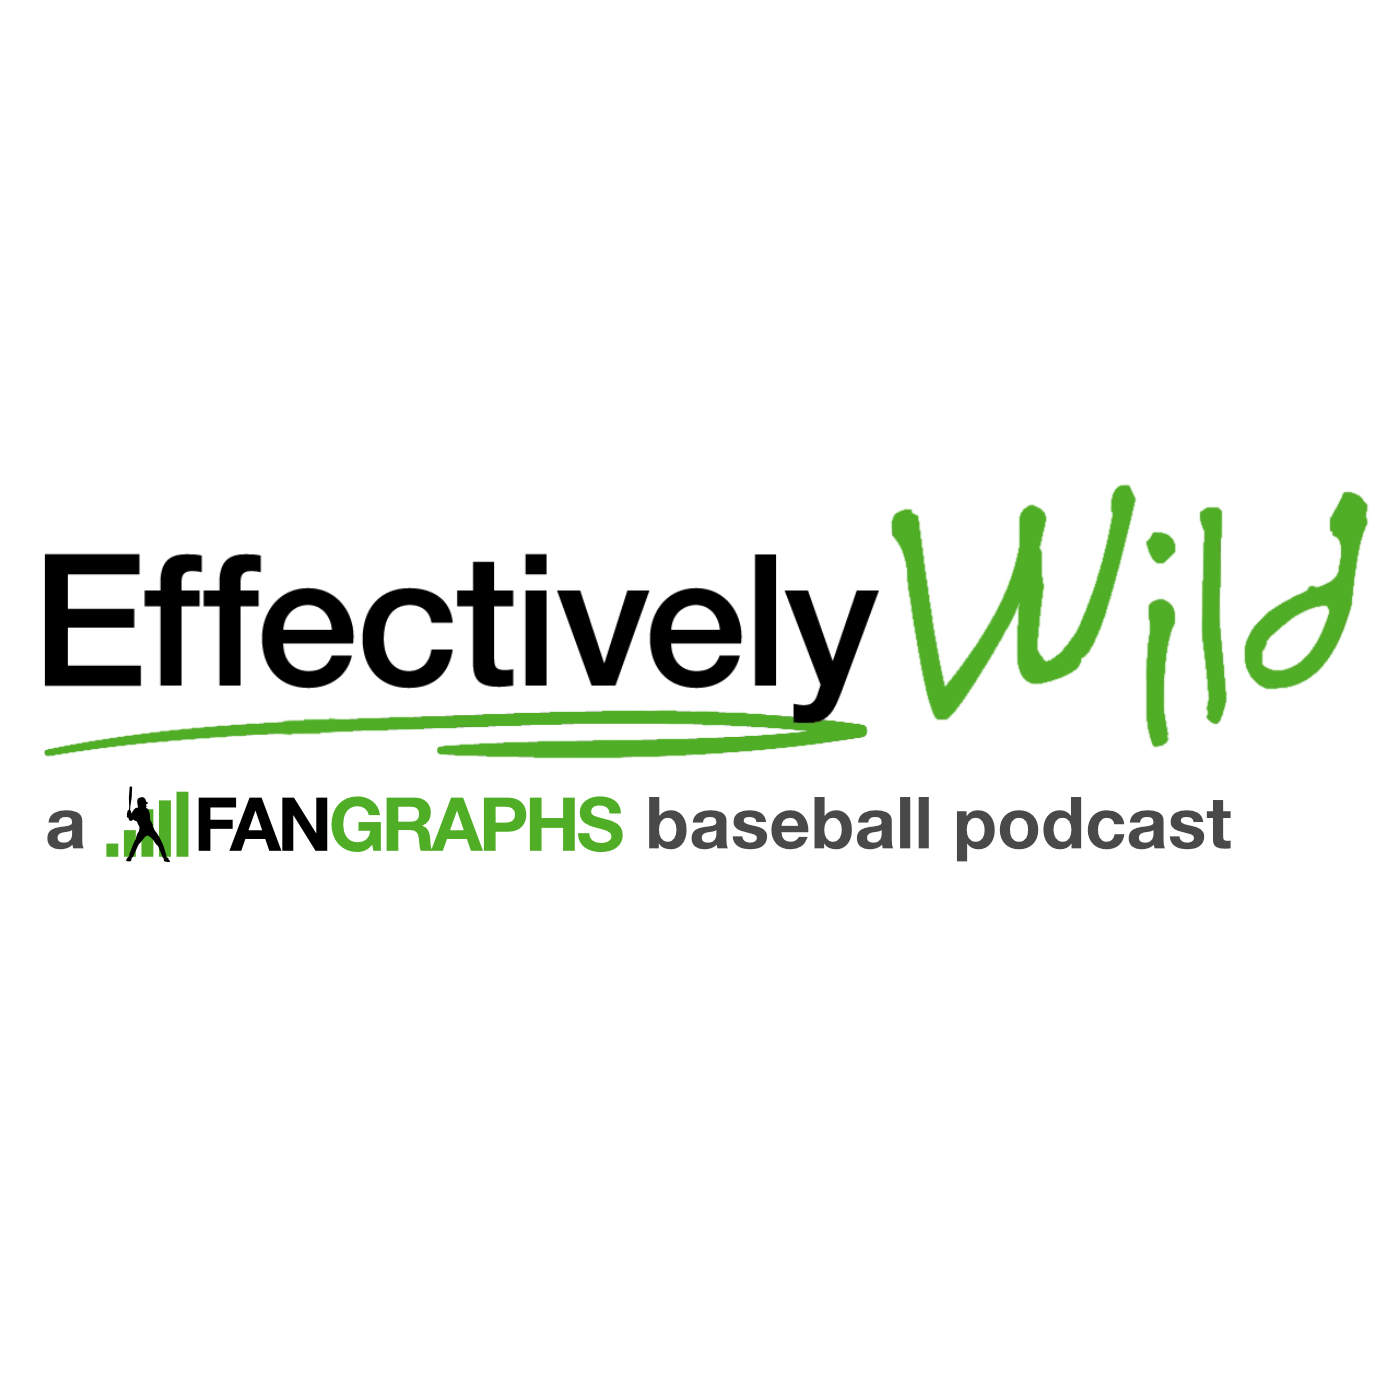 A highlight from Effectively Wild Episode 2000: We Thought of More Things We Like About Baseball